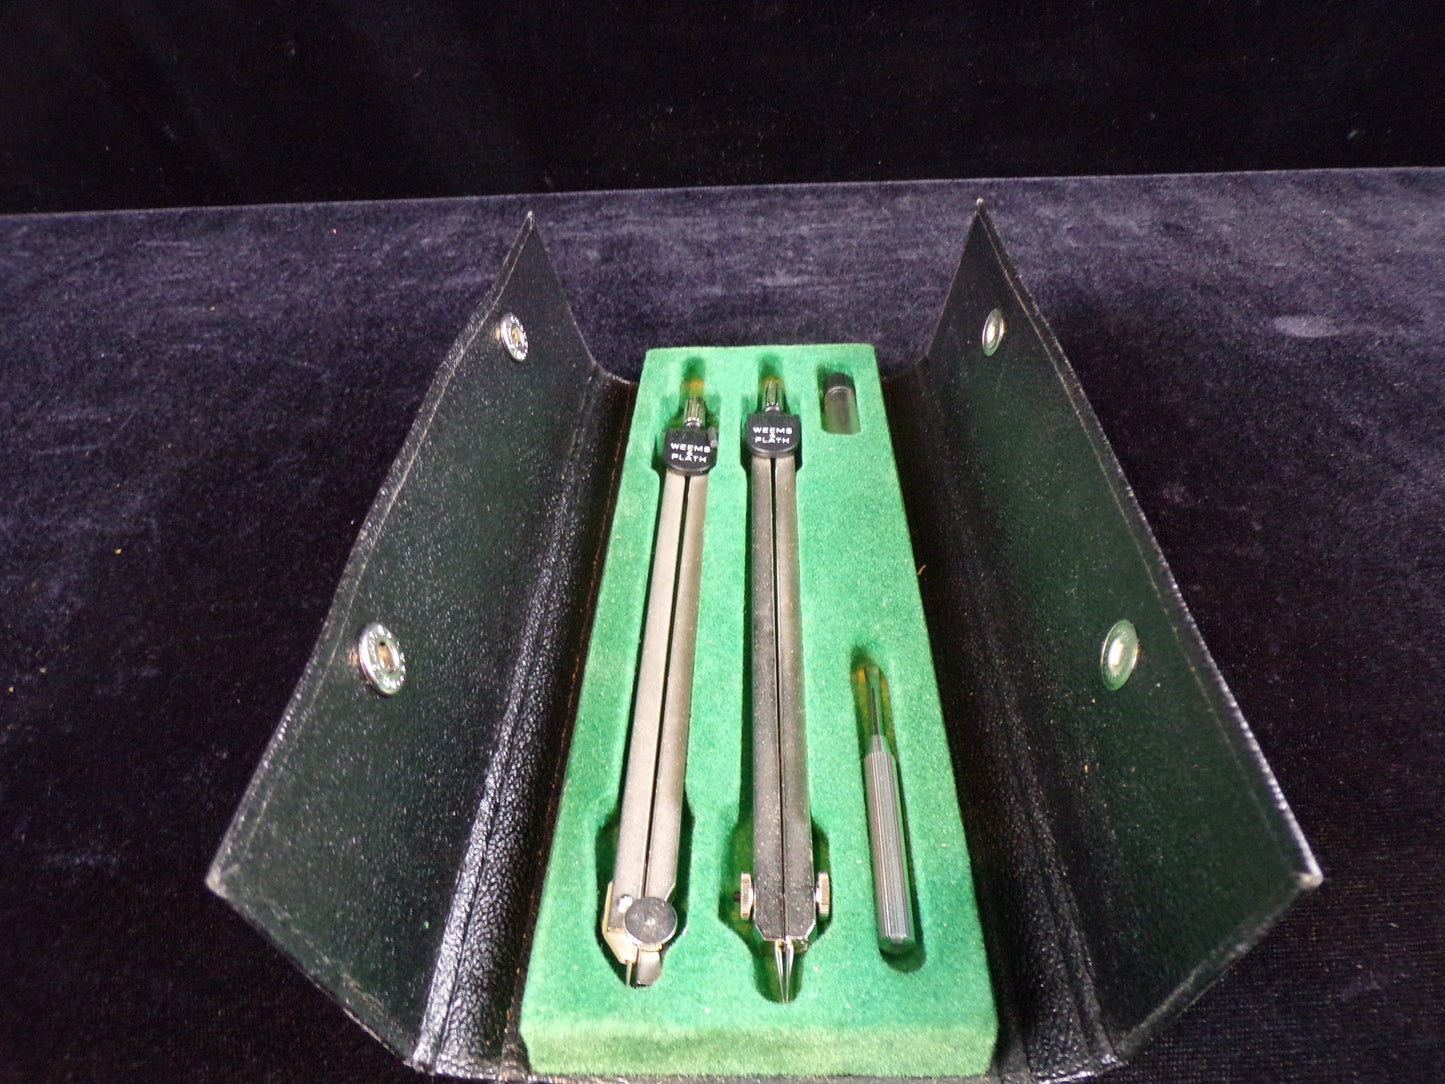 Vintage Weems & Plath Mechanical Drafting Set, 761/7", Complete, with Case